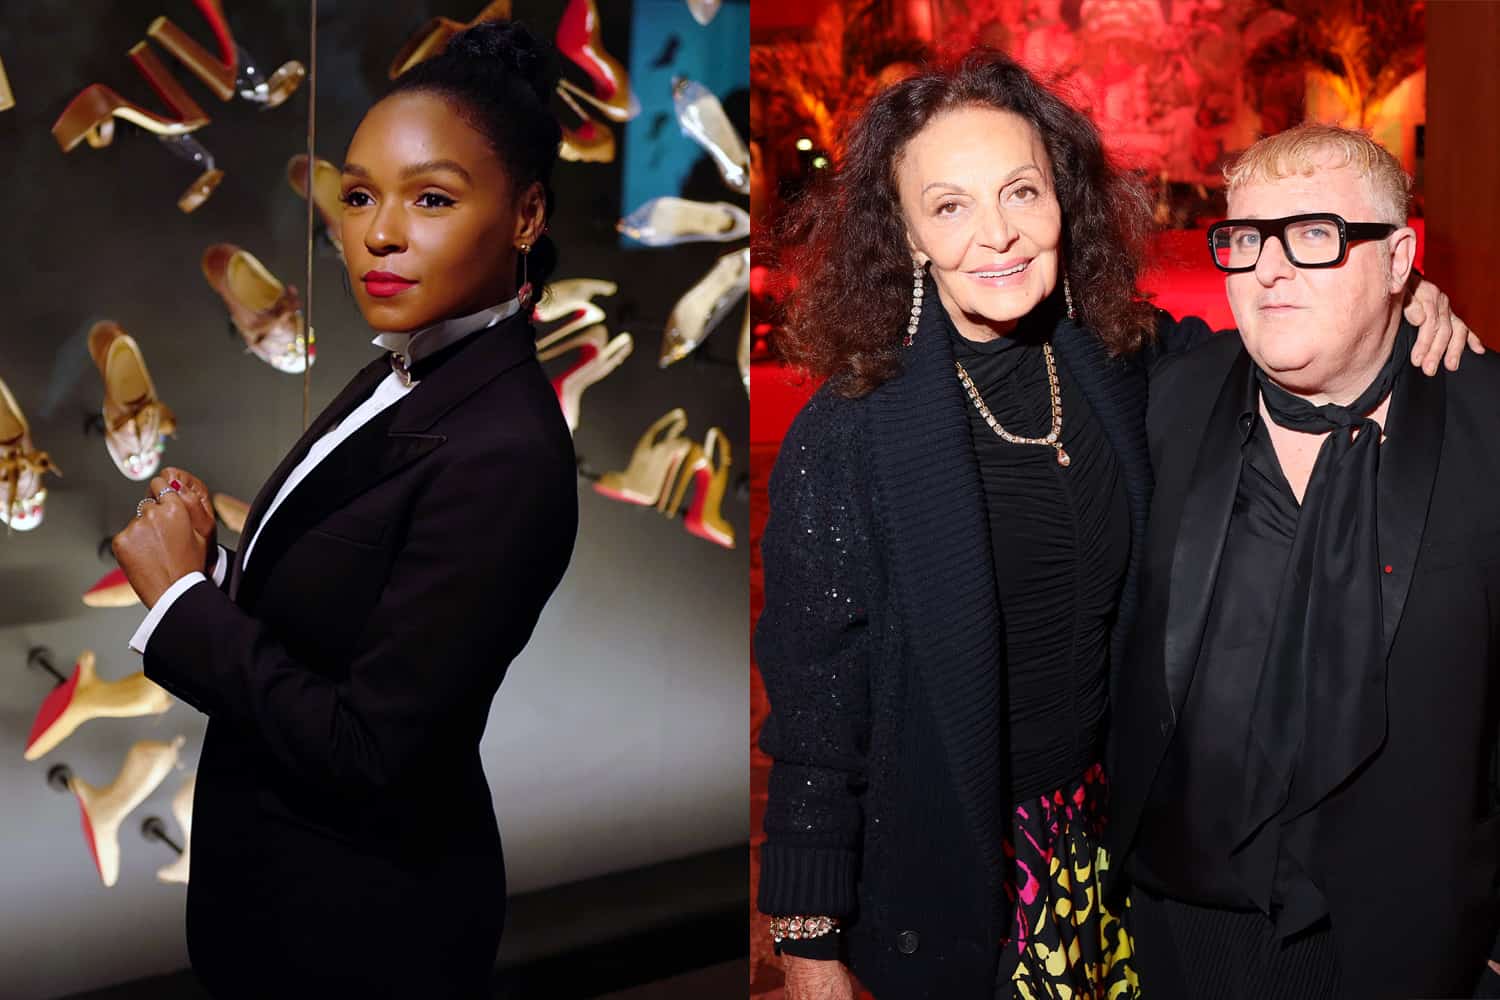 Louboutin Exhibit Opening Draws A-List Crowd + More Chic Events